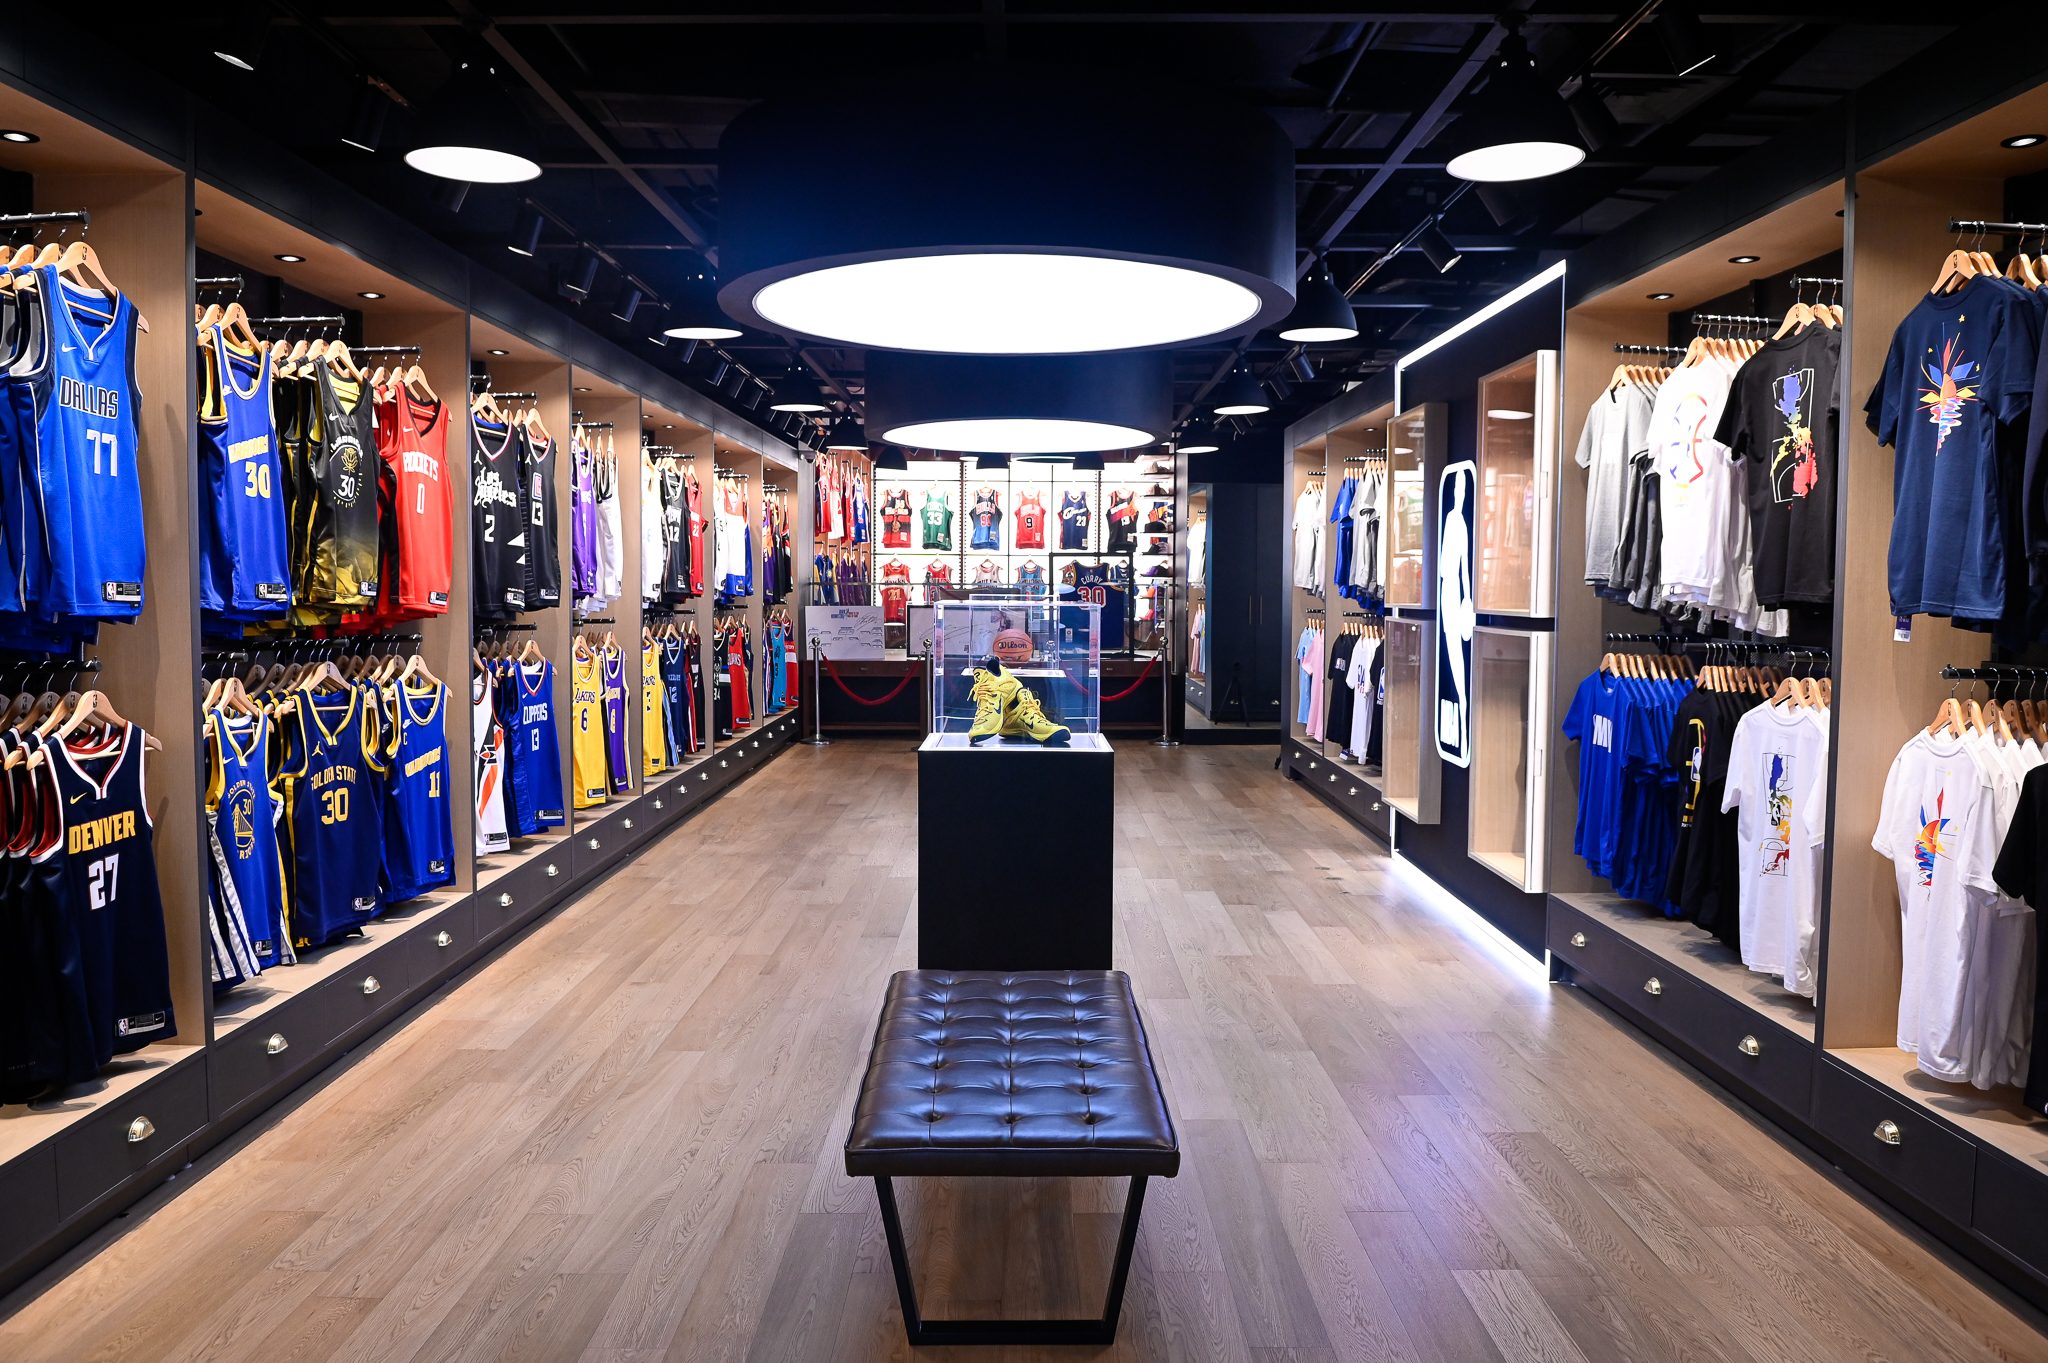 Biggest NBA Store In The Philippines To Open In SM Mall Of Asia